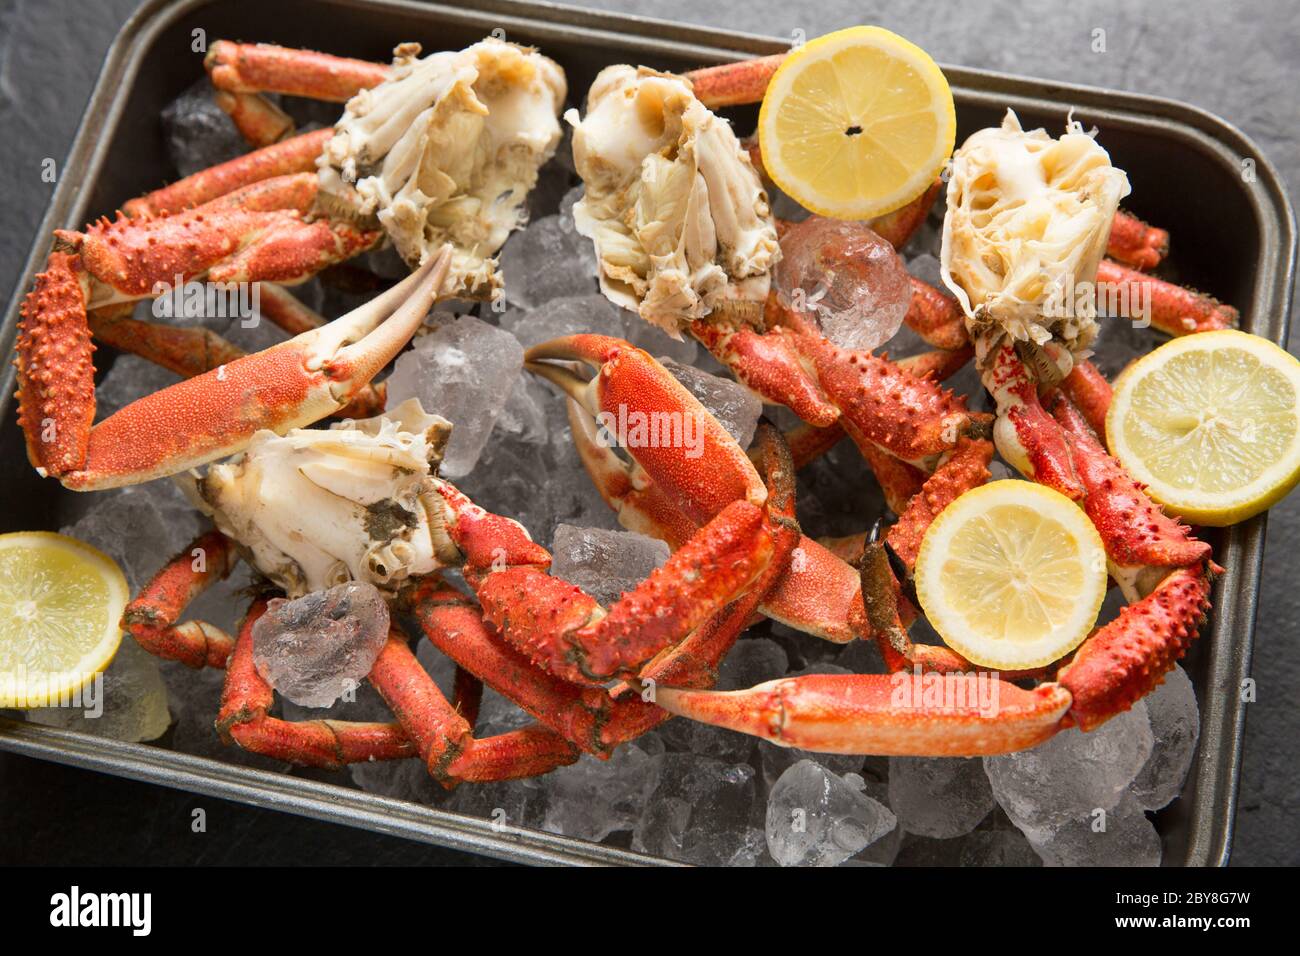 Boiled, cooked spider crab legs and carapaces, Maja brachydactyla, caught in the English Channel that have been chilled on ice. White crab meat can be Stock Photo